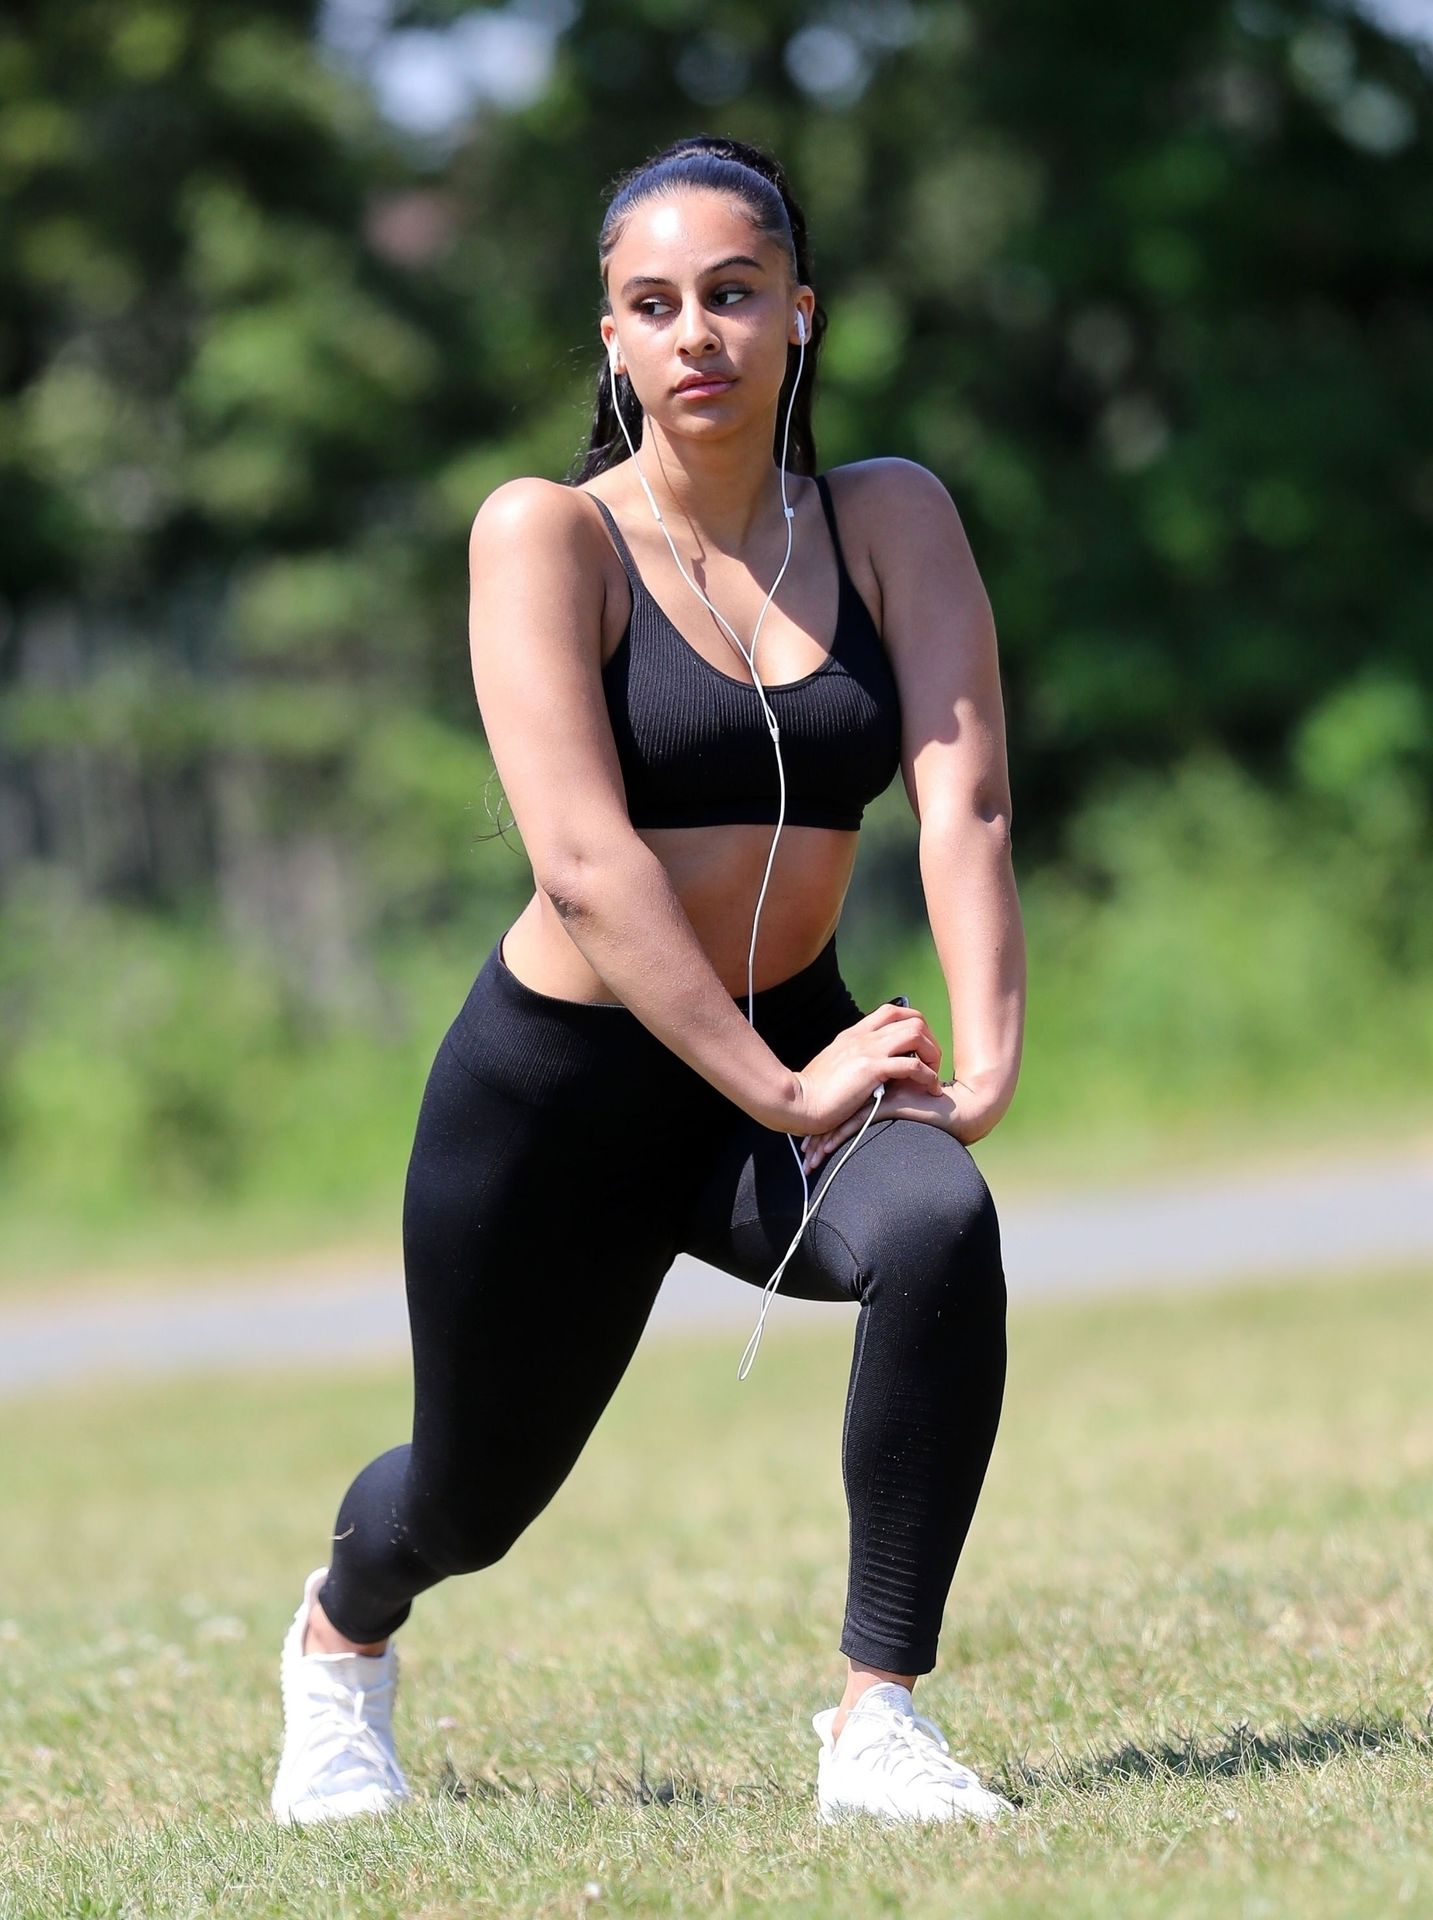 Shari Halliday Shows Off Her Fit Body in a London Park (46 Photos)